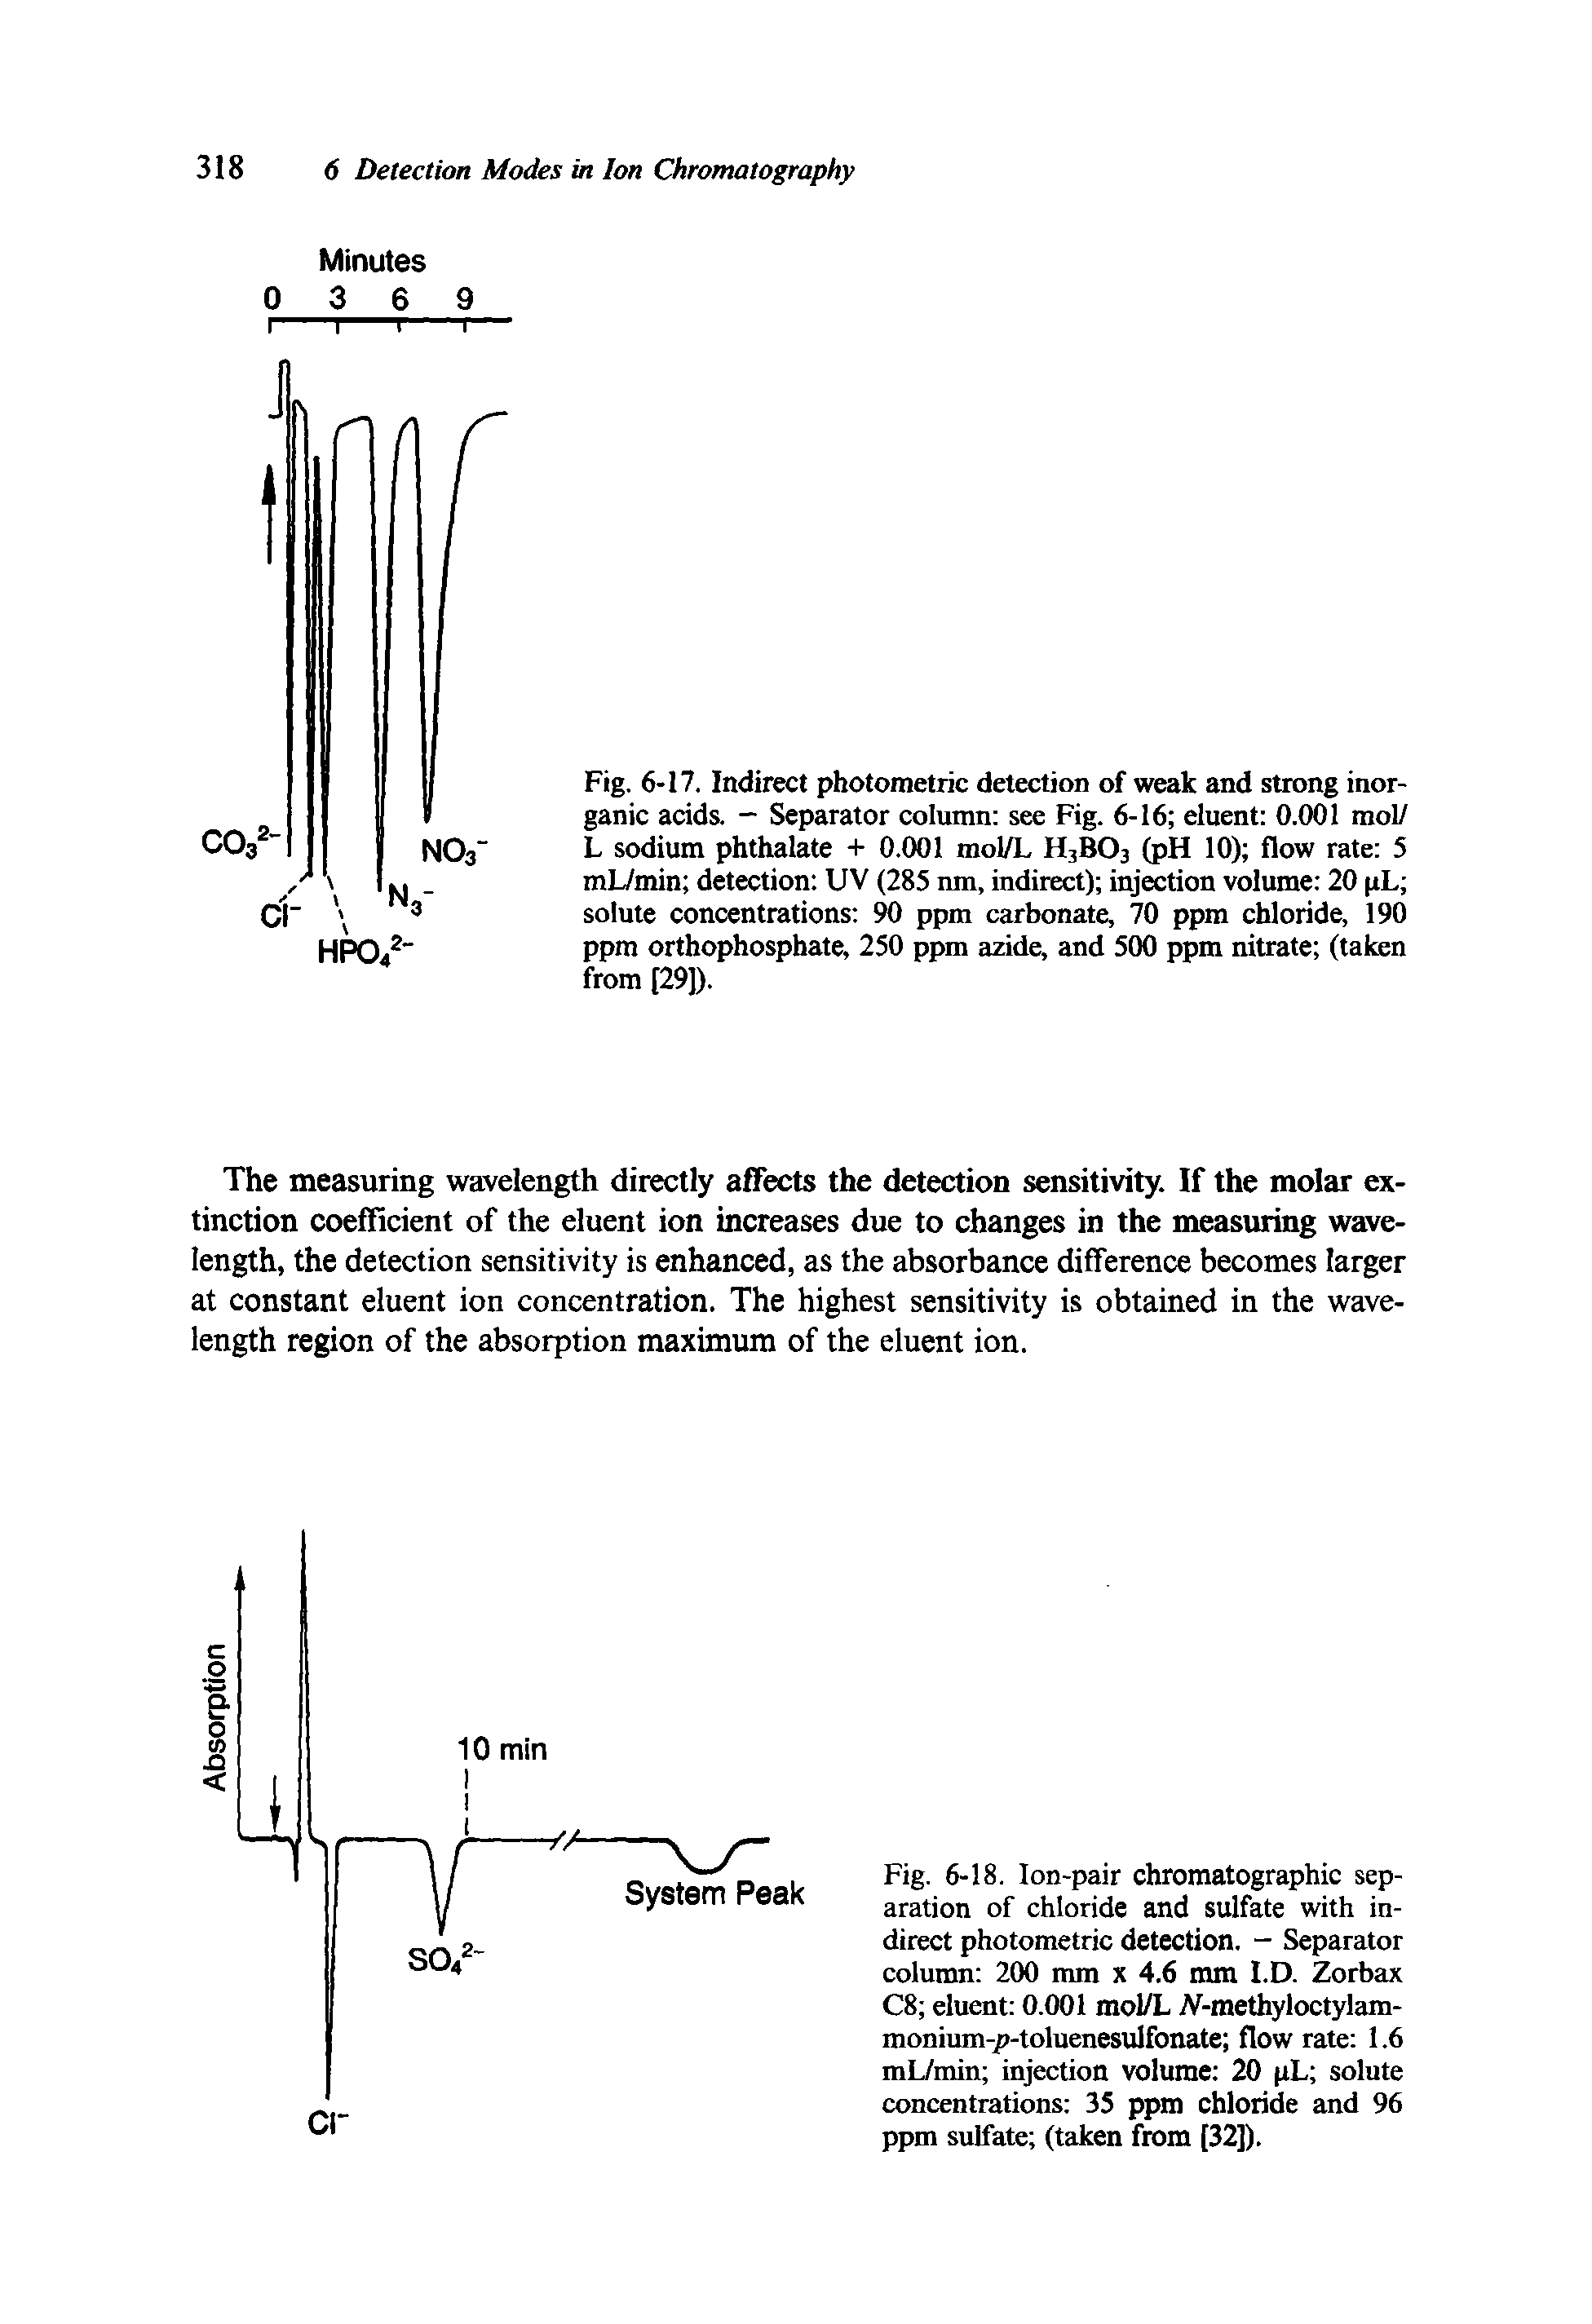 Fig. 6-18. Ion-pair chromatographic separation of chloride and sulfate with indirect photometric detection. - Separator column 200 mm x 4.6 mm l.D. Zorbax C8 eluent 0.001 mol/L /V-methyloctylam-monium-p-toluenesulfonate flow rate 1.6 mL/min injection volume 20 pL solute concentrations 35 ppm chloride and 96 ppm sulfate (taken from [32]).